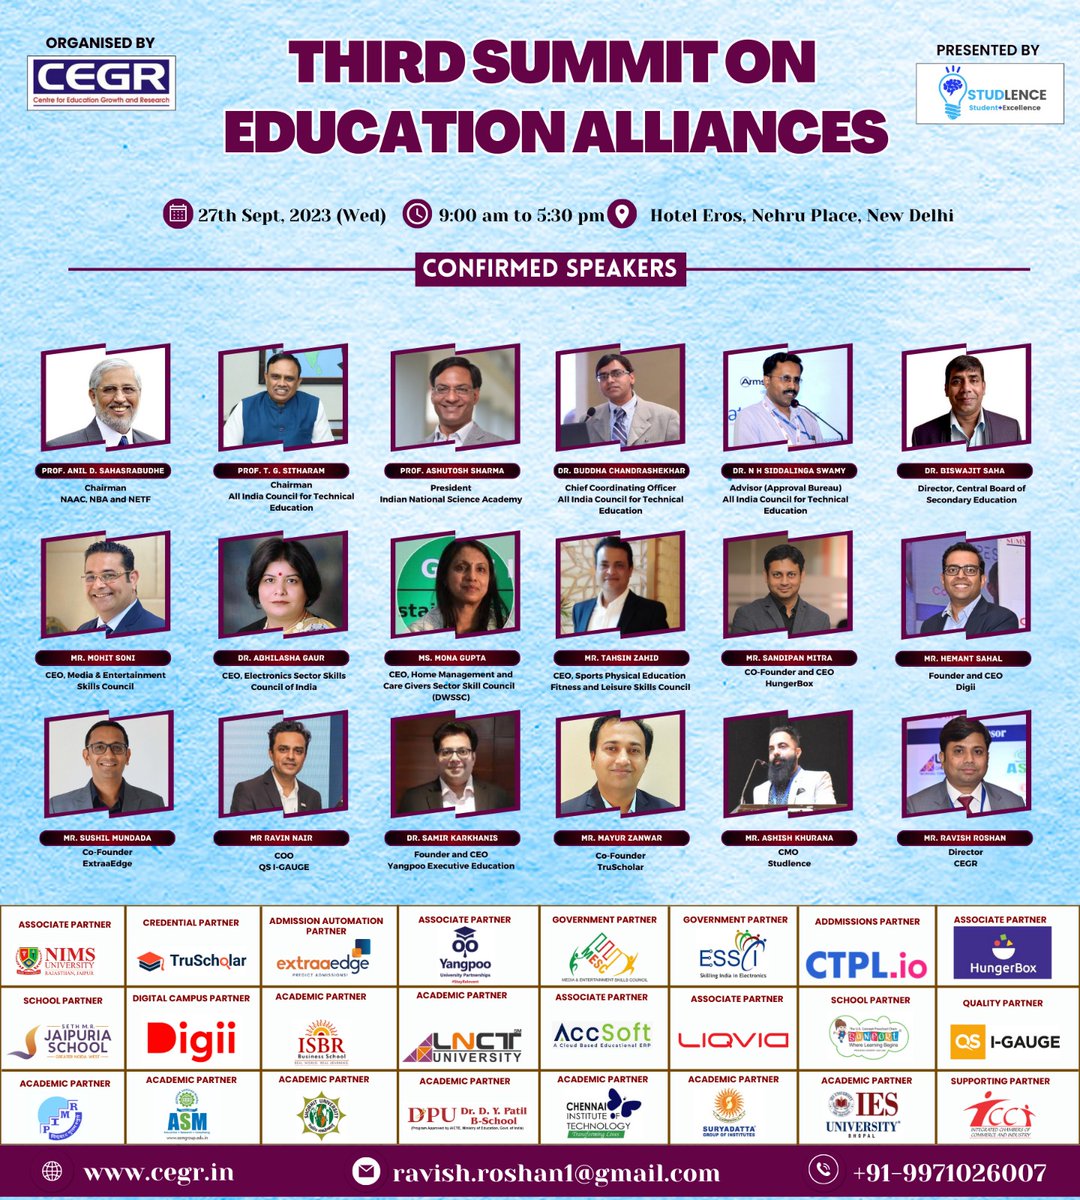 Looking forward to an insightful discussion at the 'Third Summit on Education Alliances' organised by @cegrindia. #GoDigii